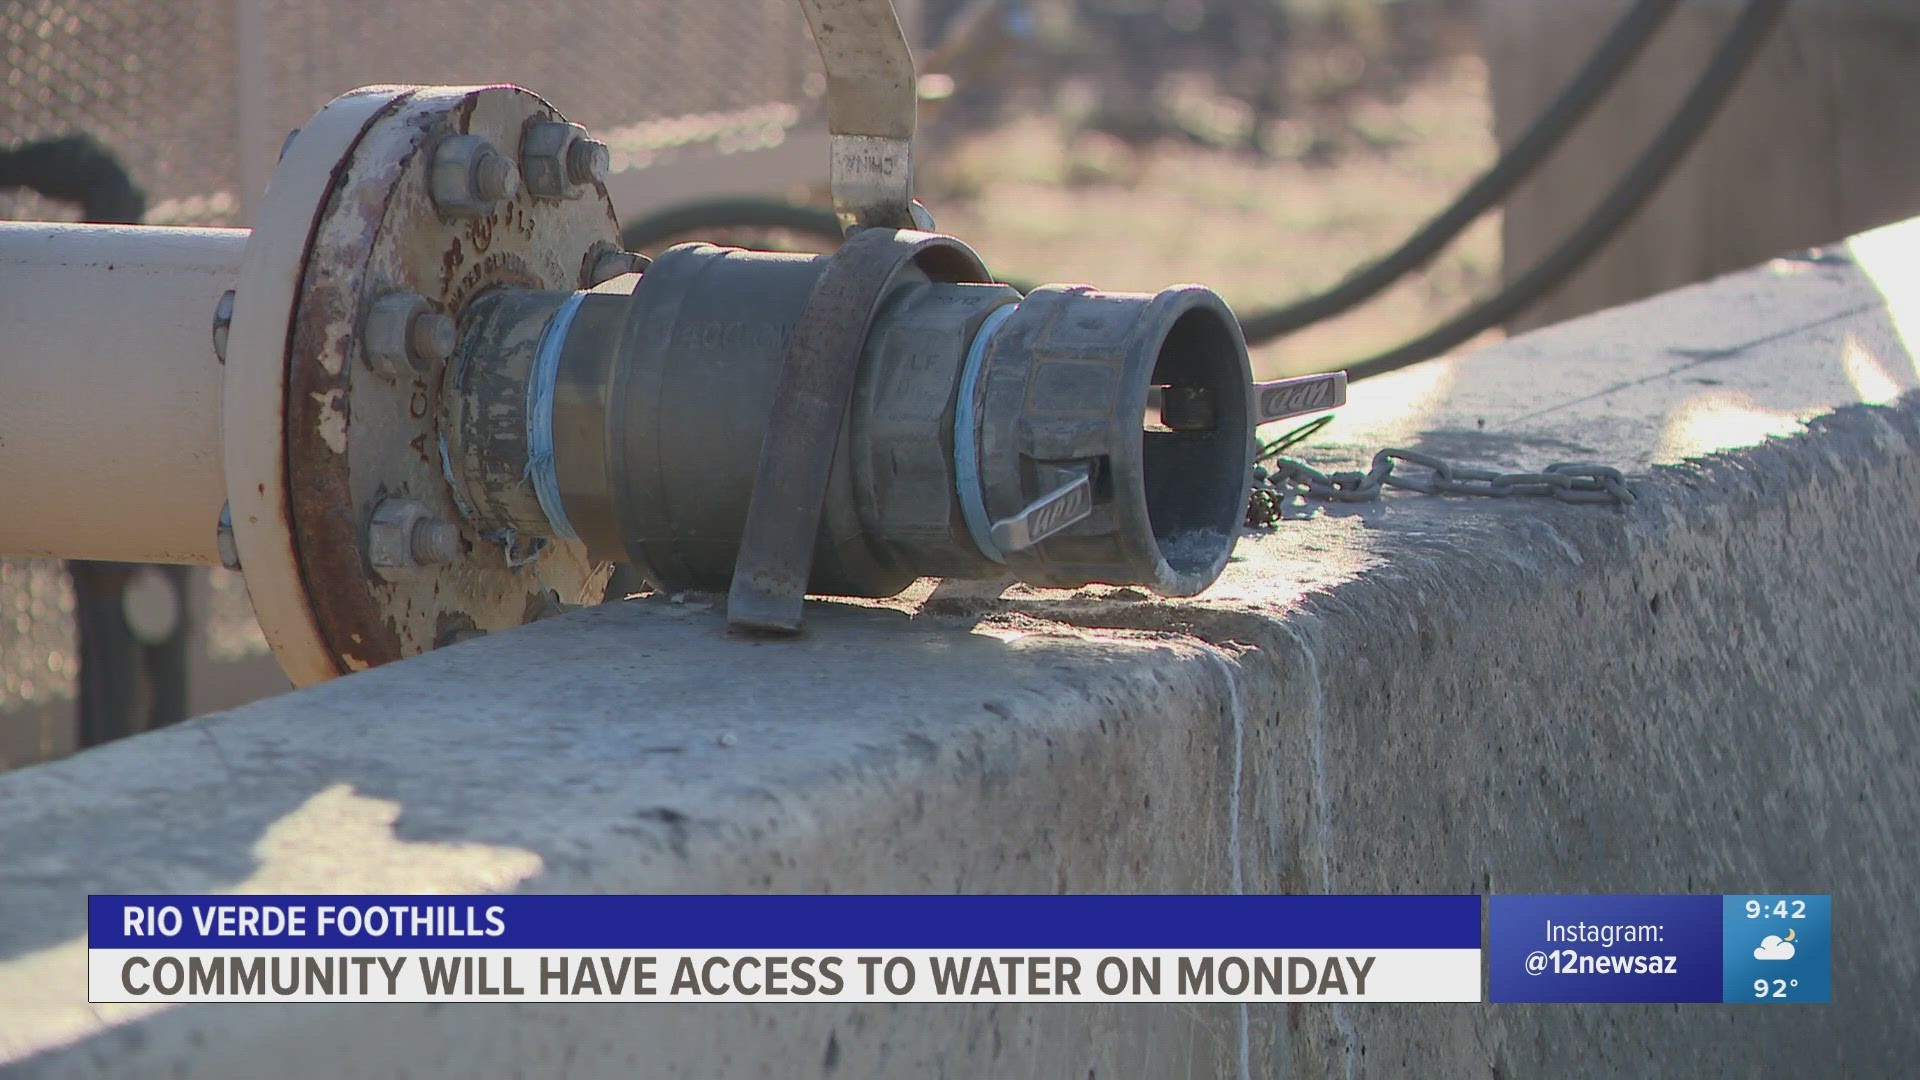 Rio Verde Foothills regains access to a Scottsdale water fill station after being cut off 10 months ago.